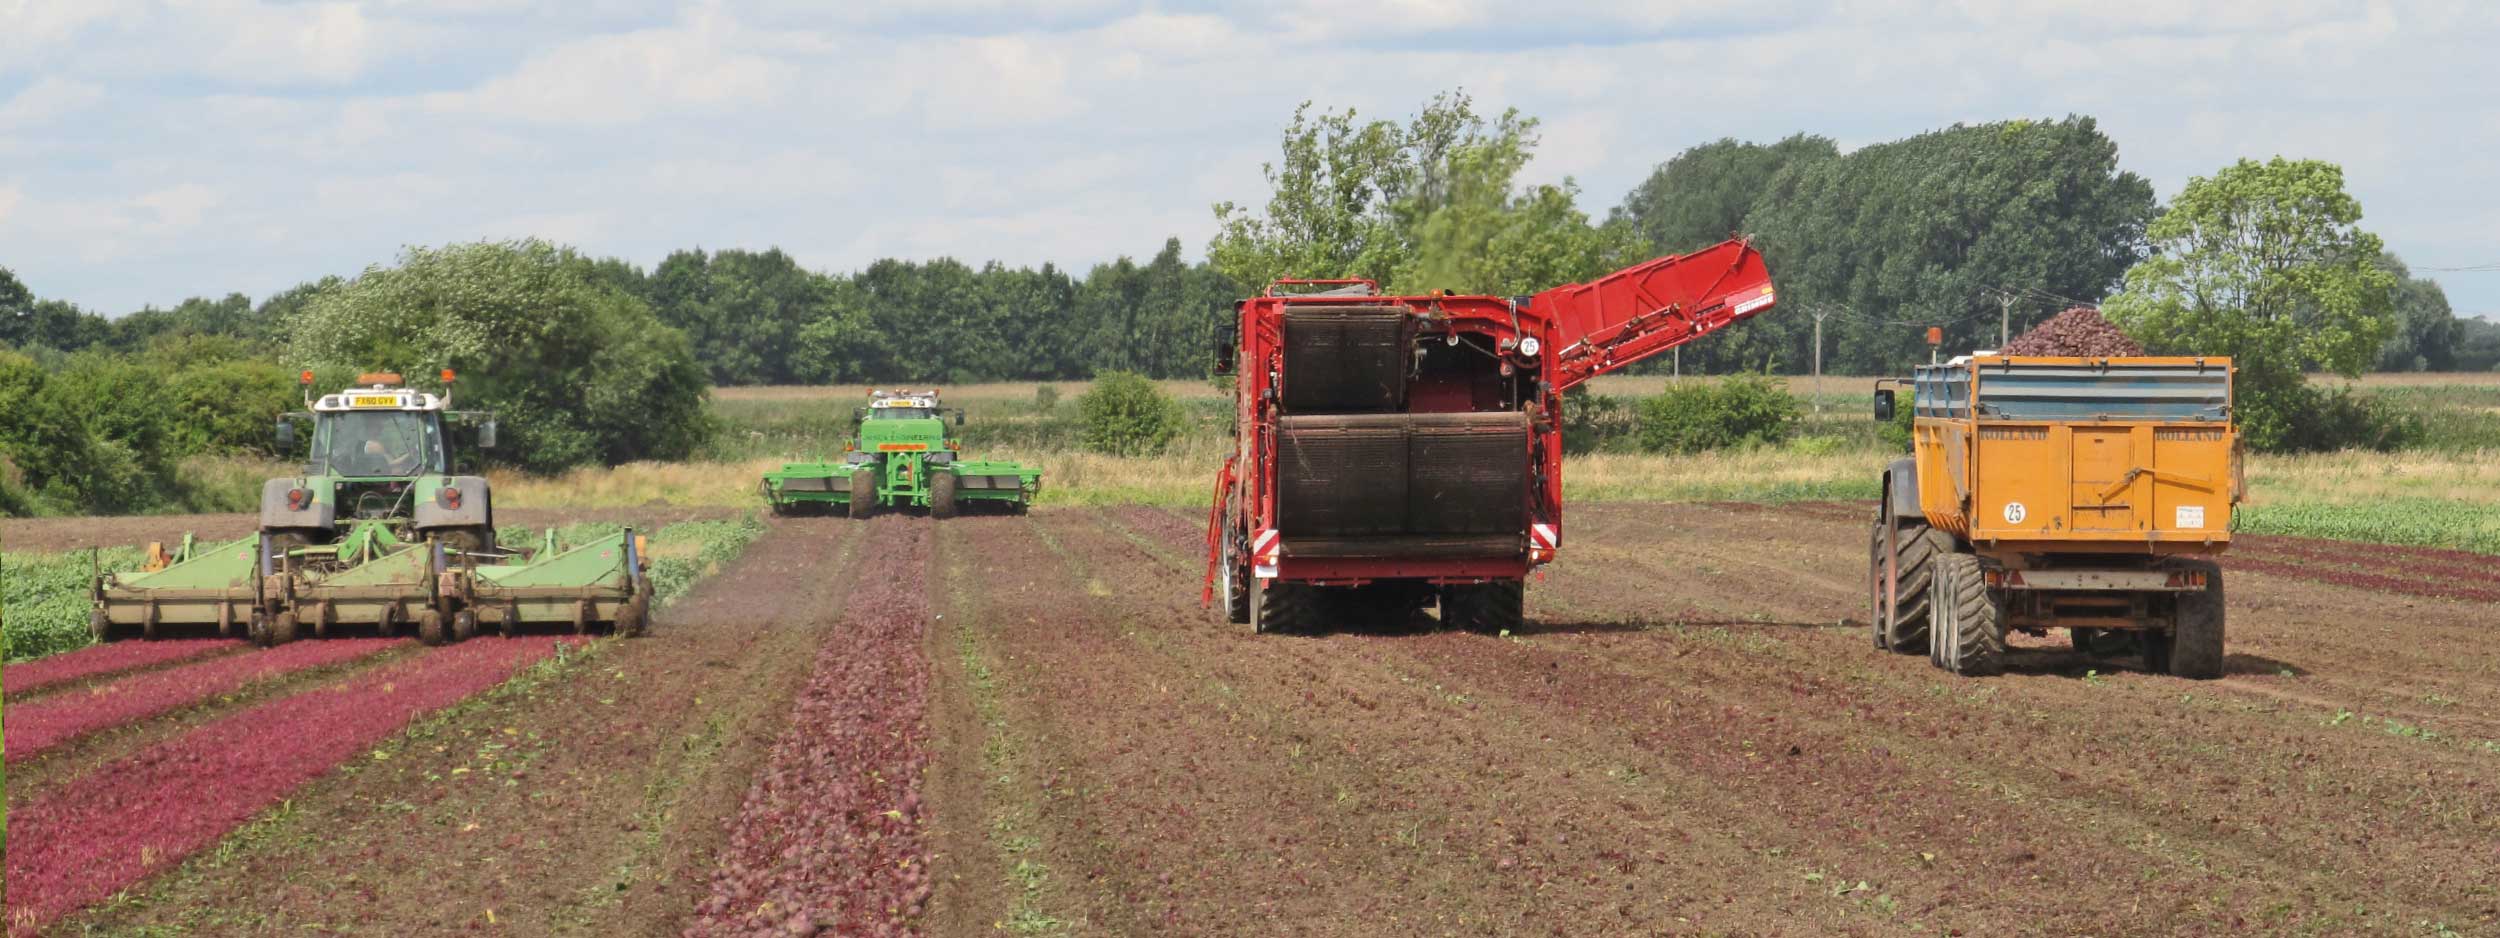 grower and supplier of quality beetroot in Nottinghamshire, England, UK